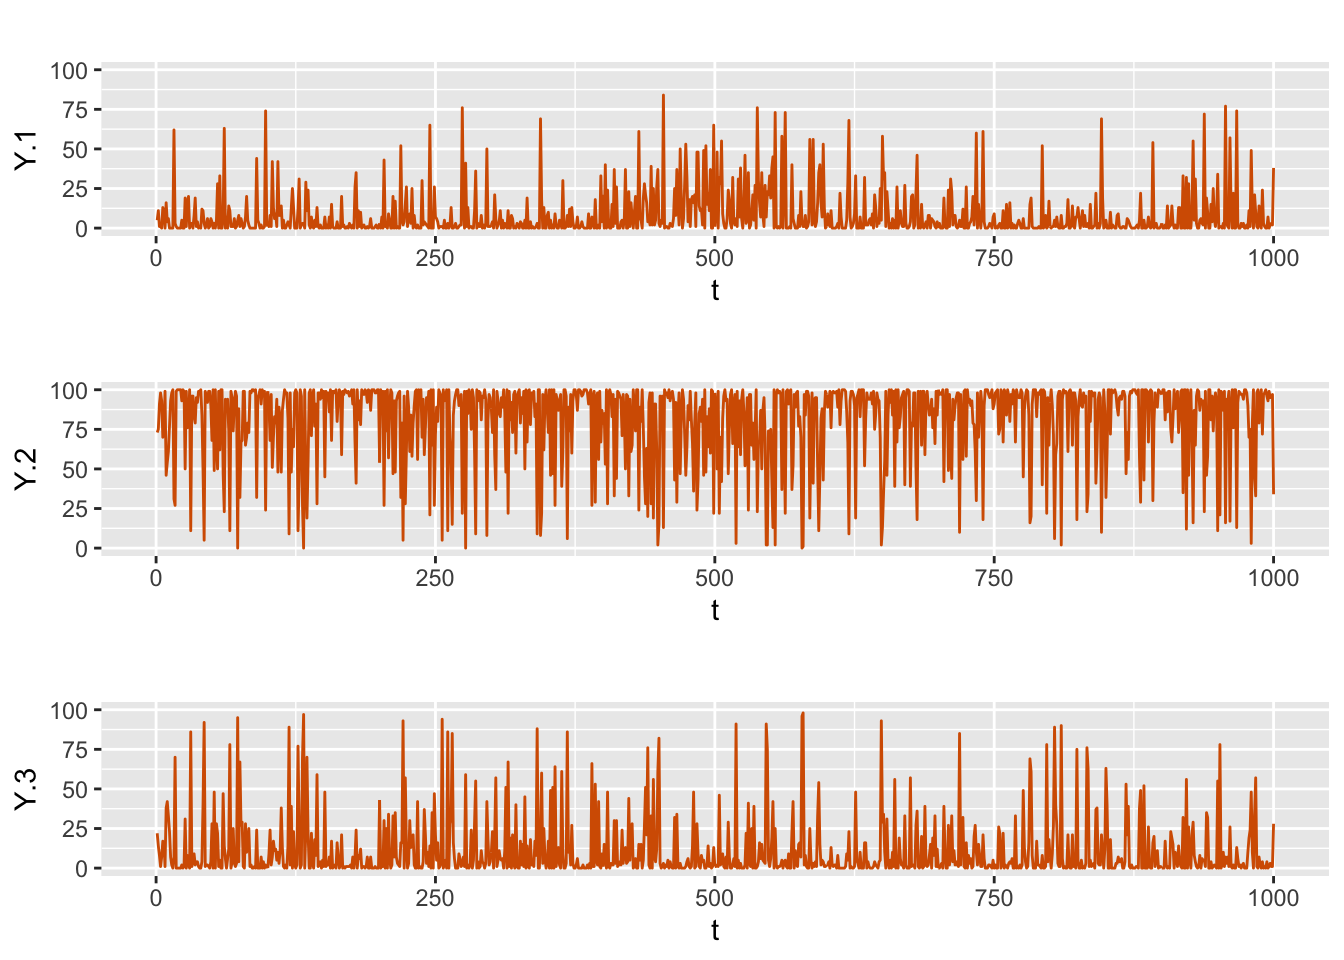 Simulated multinomial time series from Model D1.